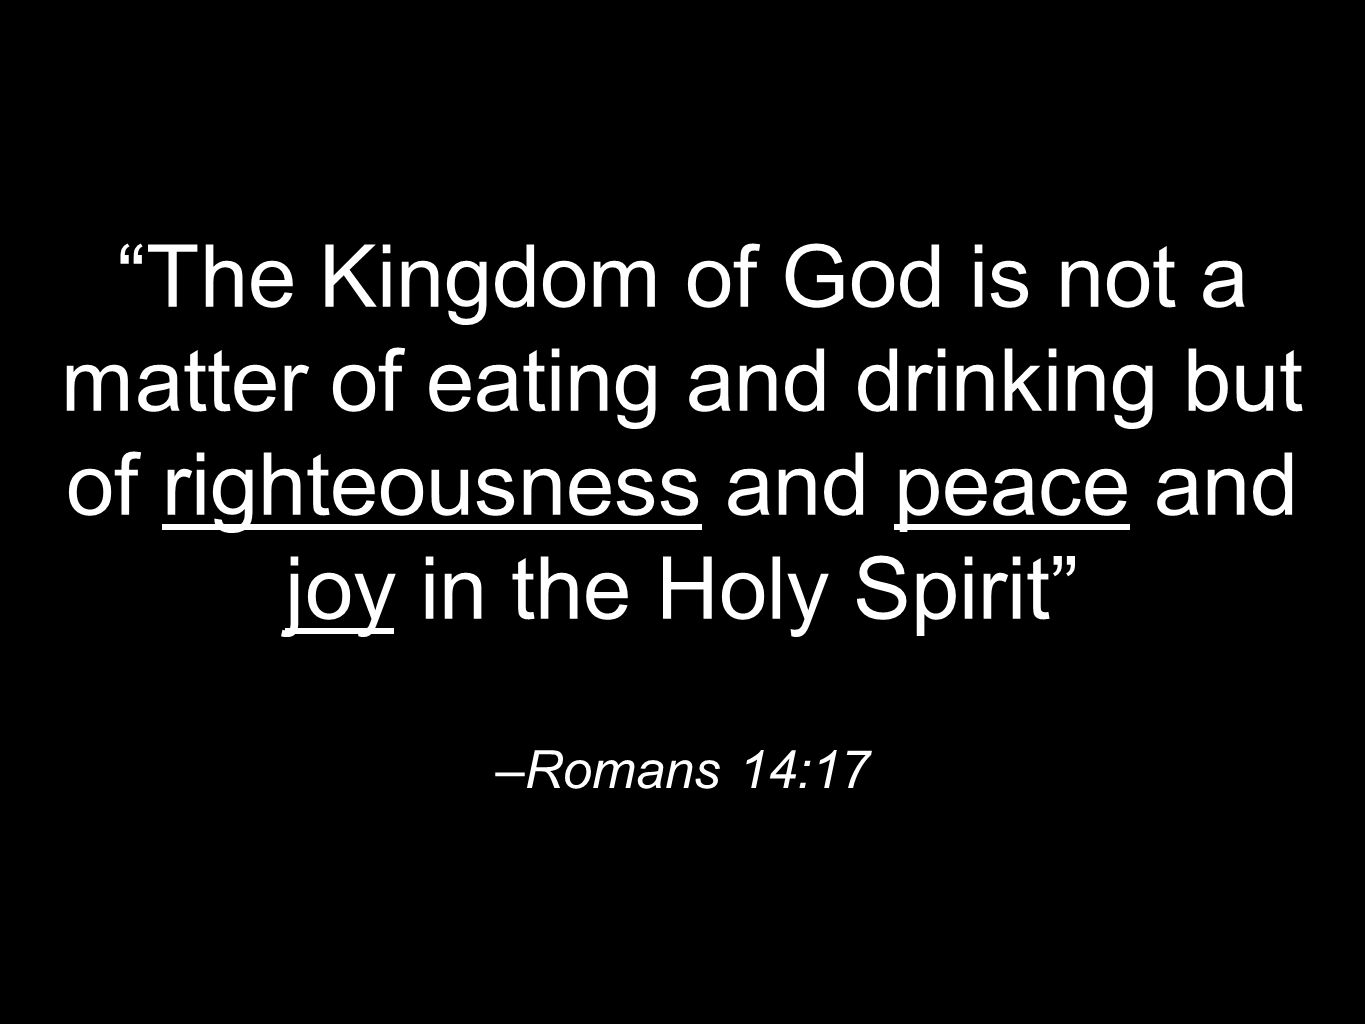 –Romans 14:17 The Kingdom of God is not a matter of eating and drinking but of righteousness and peace and joy in the Holy Spirit